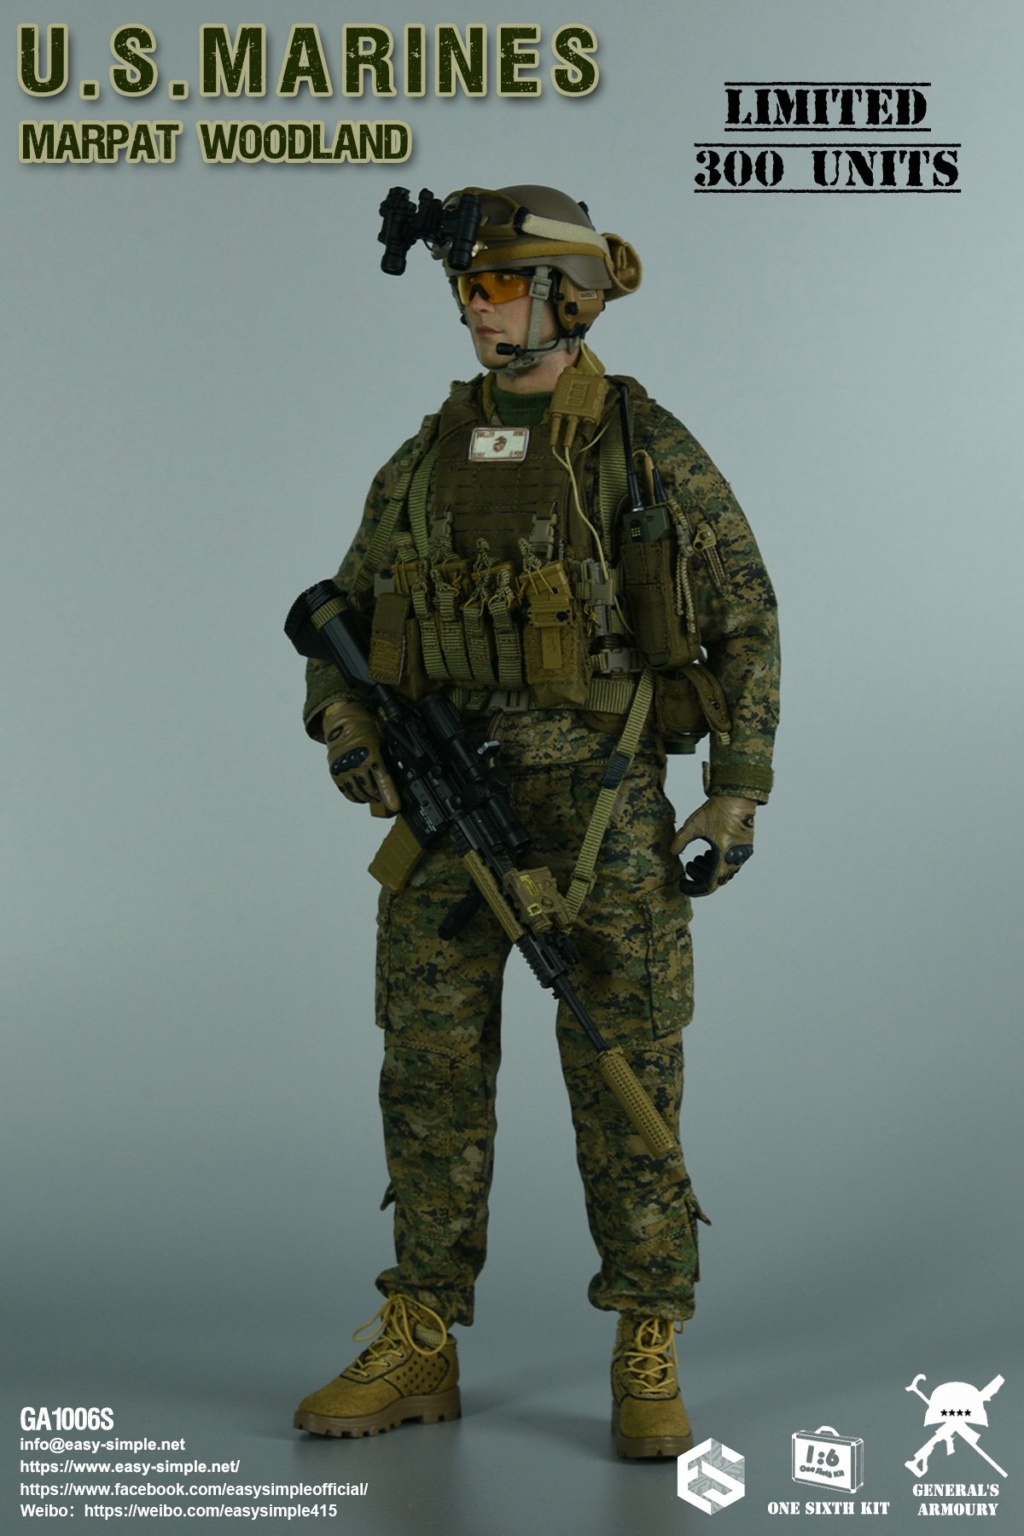 NEW PRODUCT: General‘s Armoury: GA1006S 1/6 Scale U.S. MARINES MARPAT WOODLAND (Limited 300 Units) 28694310